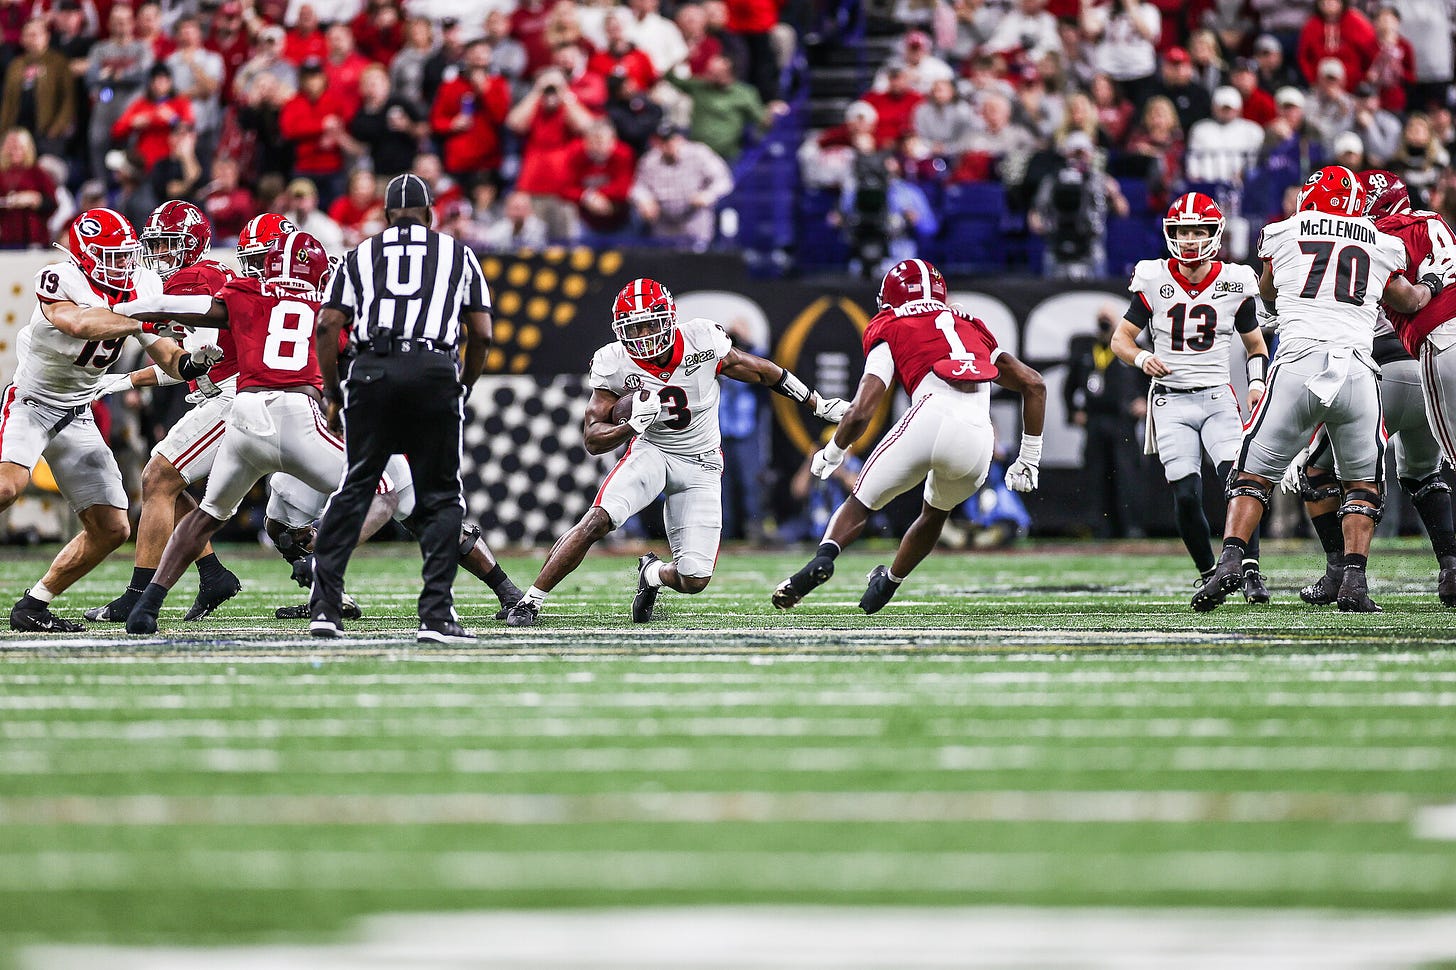 Georgia during the College Football Playoff National Championship at Lucas Oil Stadium in Indianapolis, Ind., on Monday Jan. 10, 2022. (Photo by Mackenzie Miles)